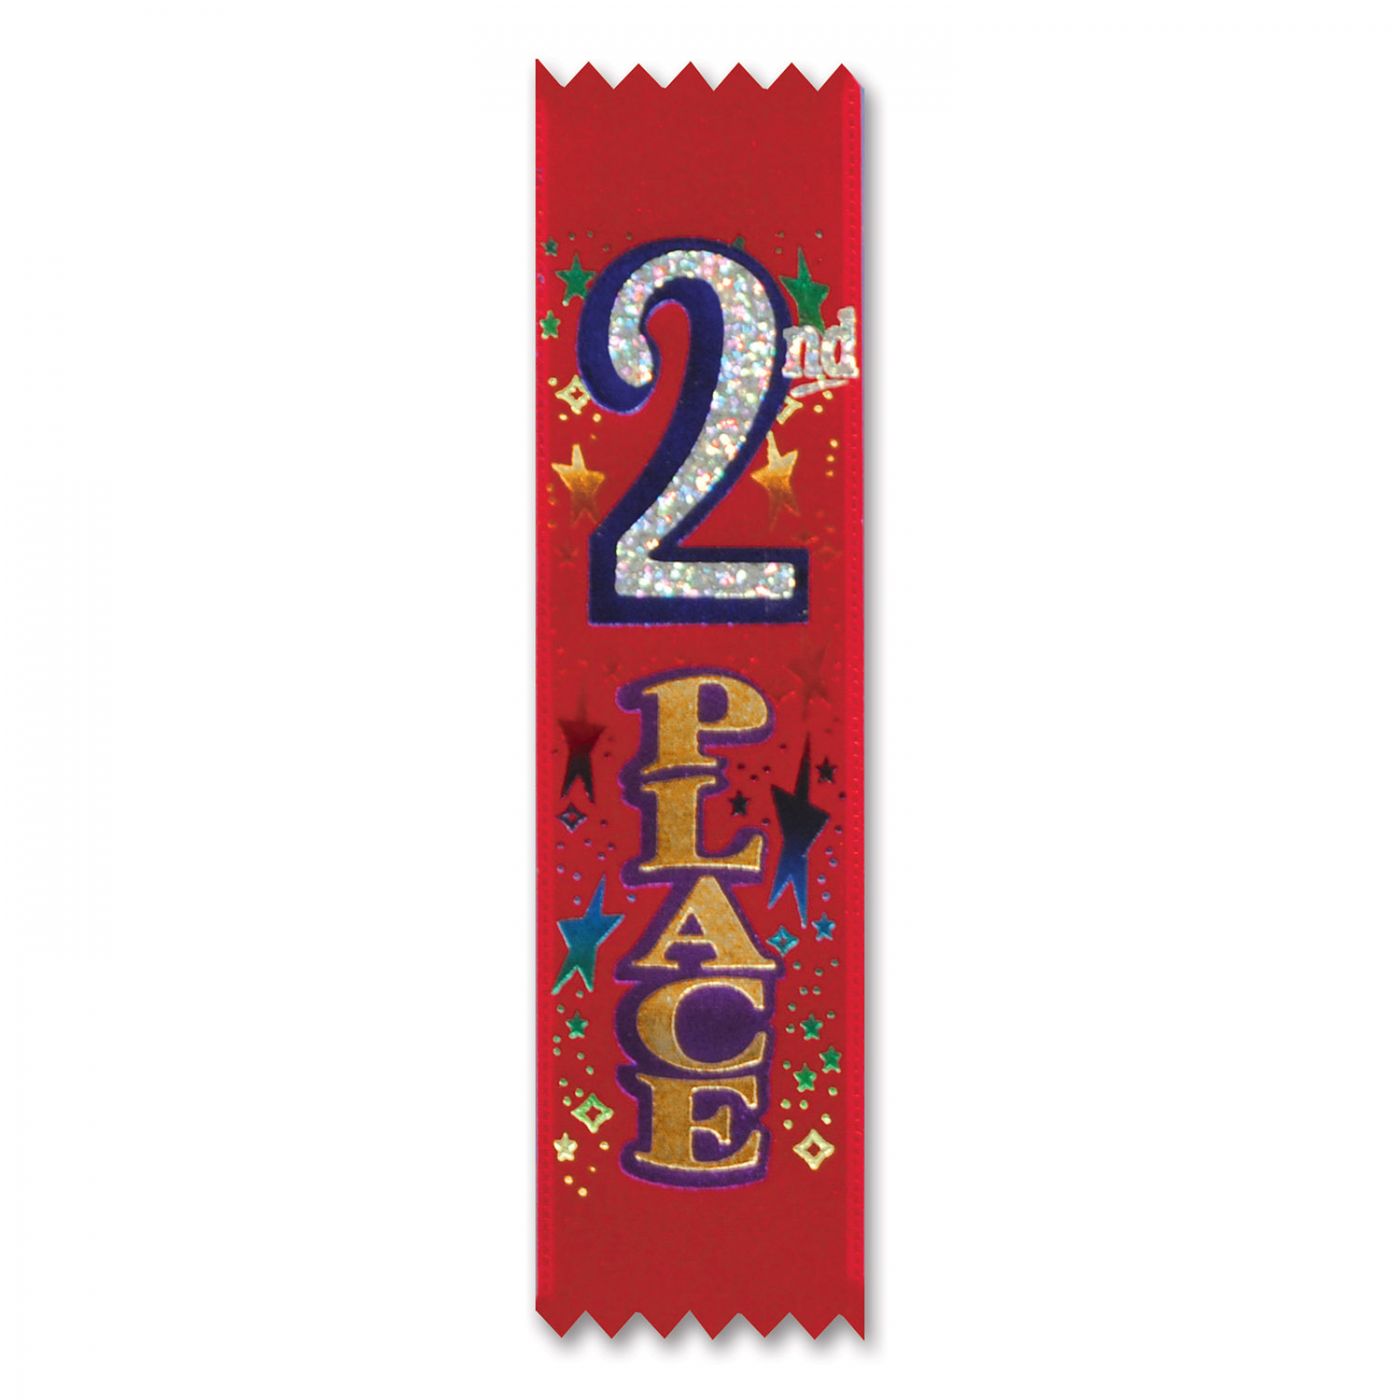 2nd Place Value Pack Ribbons (3) image